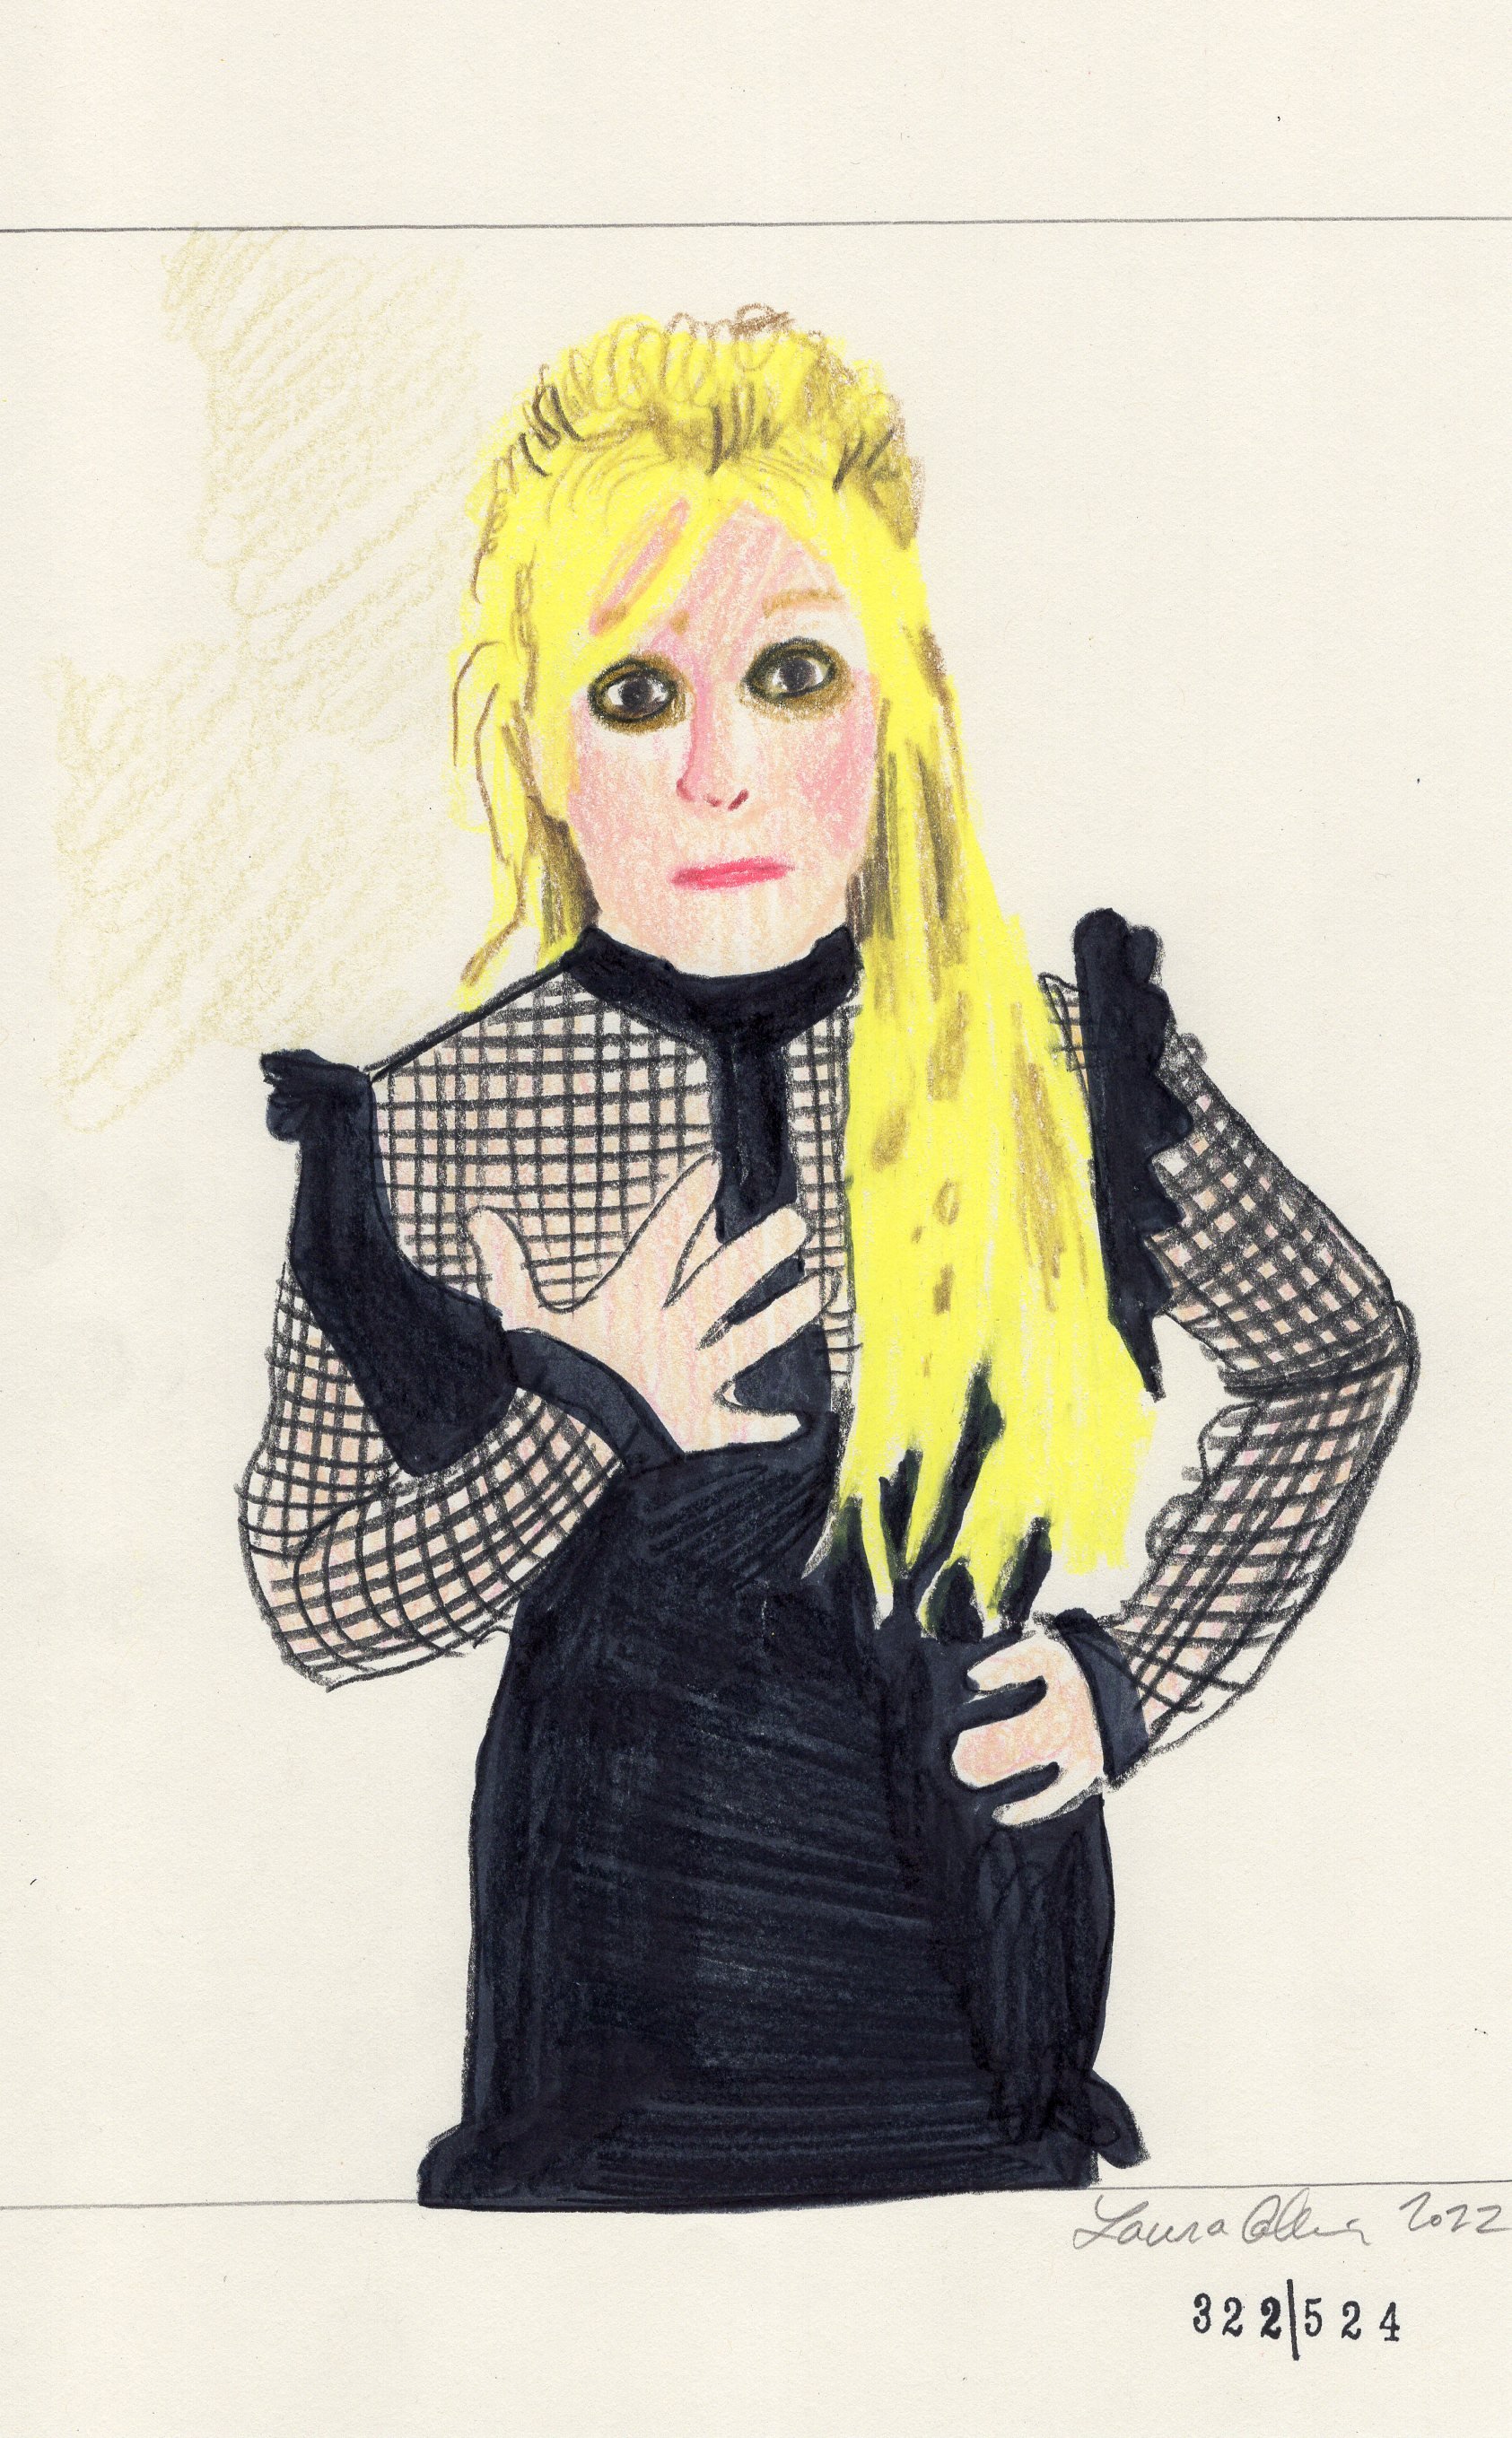 Laura Collins Britney Spears Animation 6x9in mixed media 2022 no322.jpg